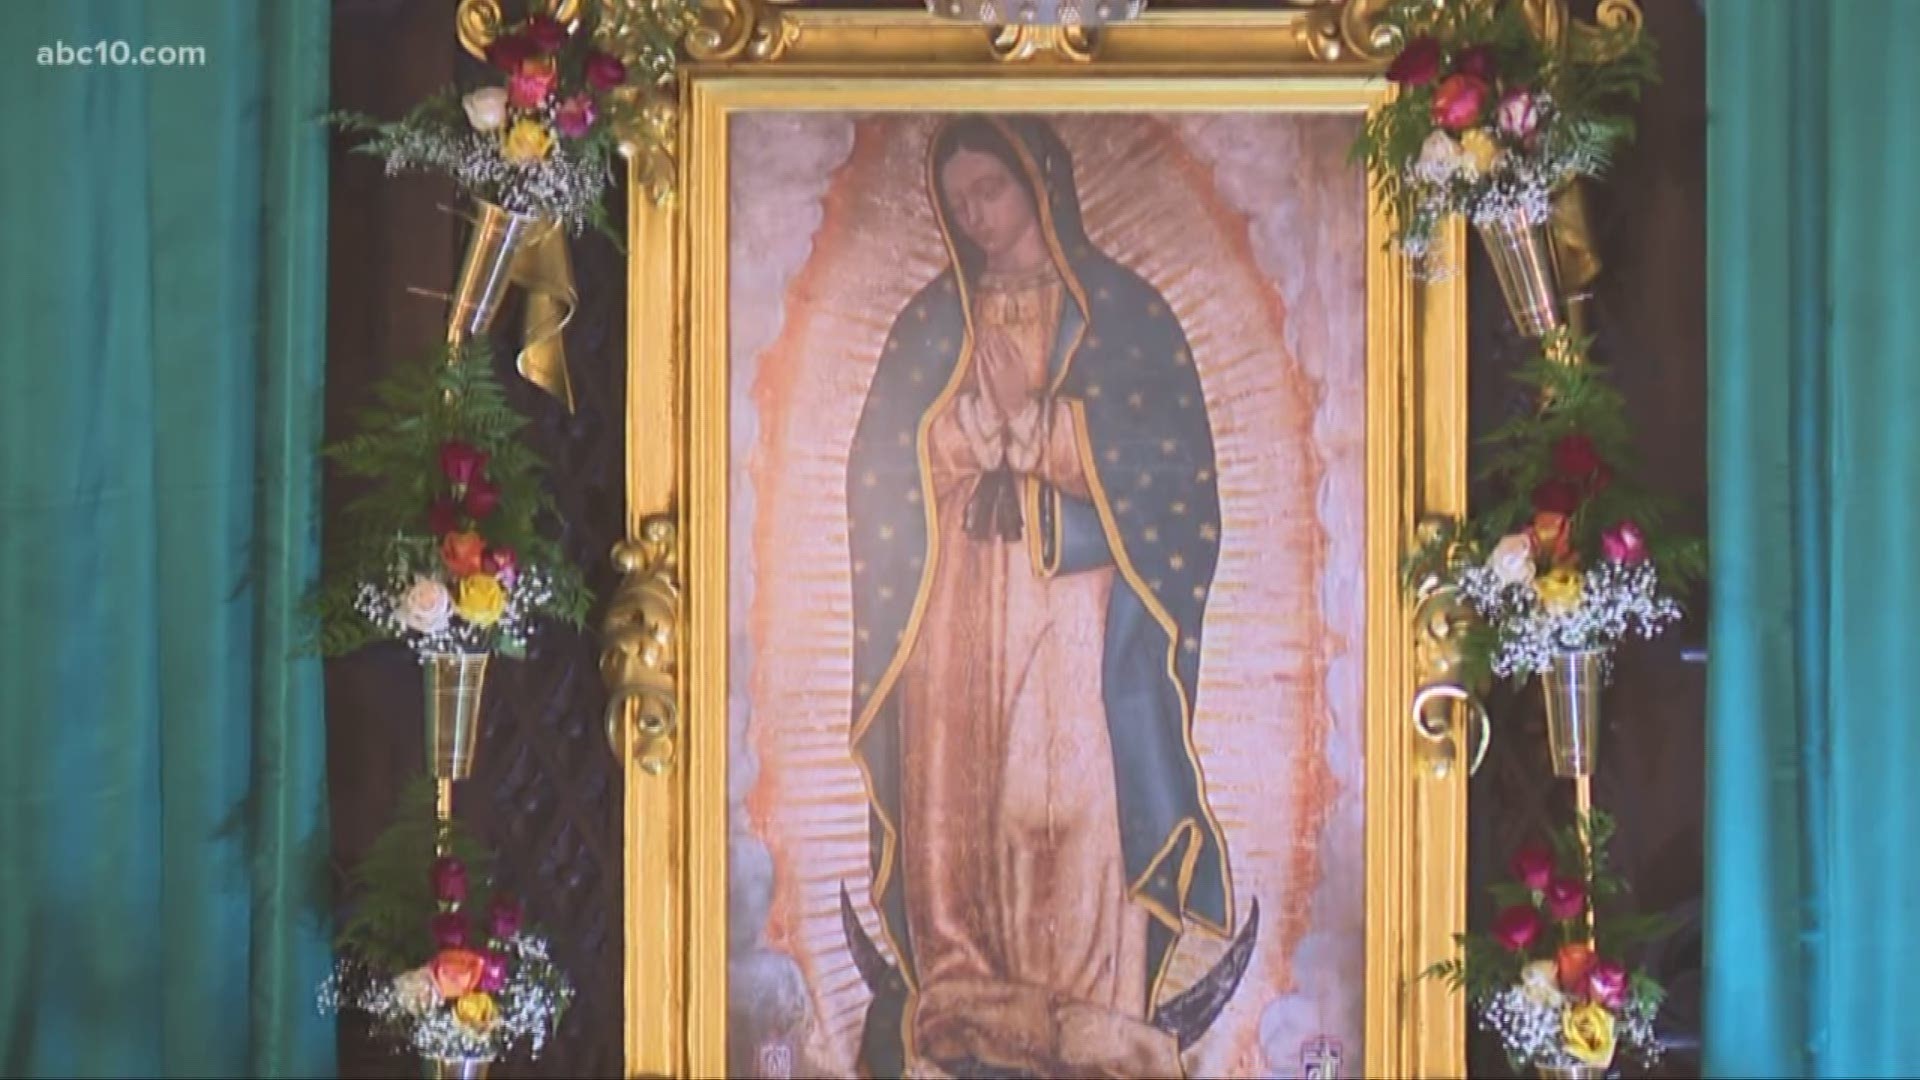 Our Lady of Guadalupe is a symbol of hope and the "Mother of All" who have sadness, toils, labors and difficulties.